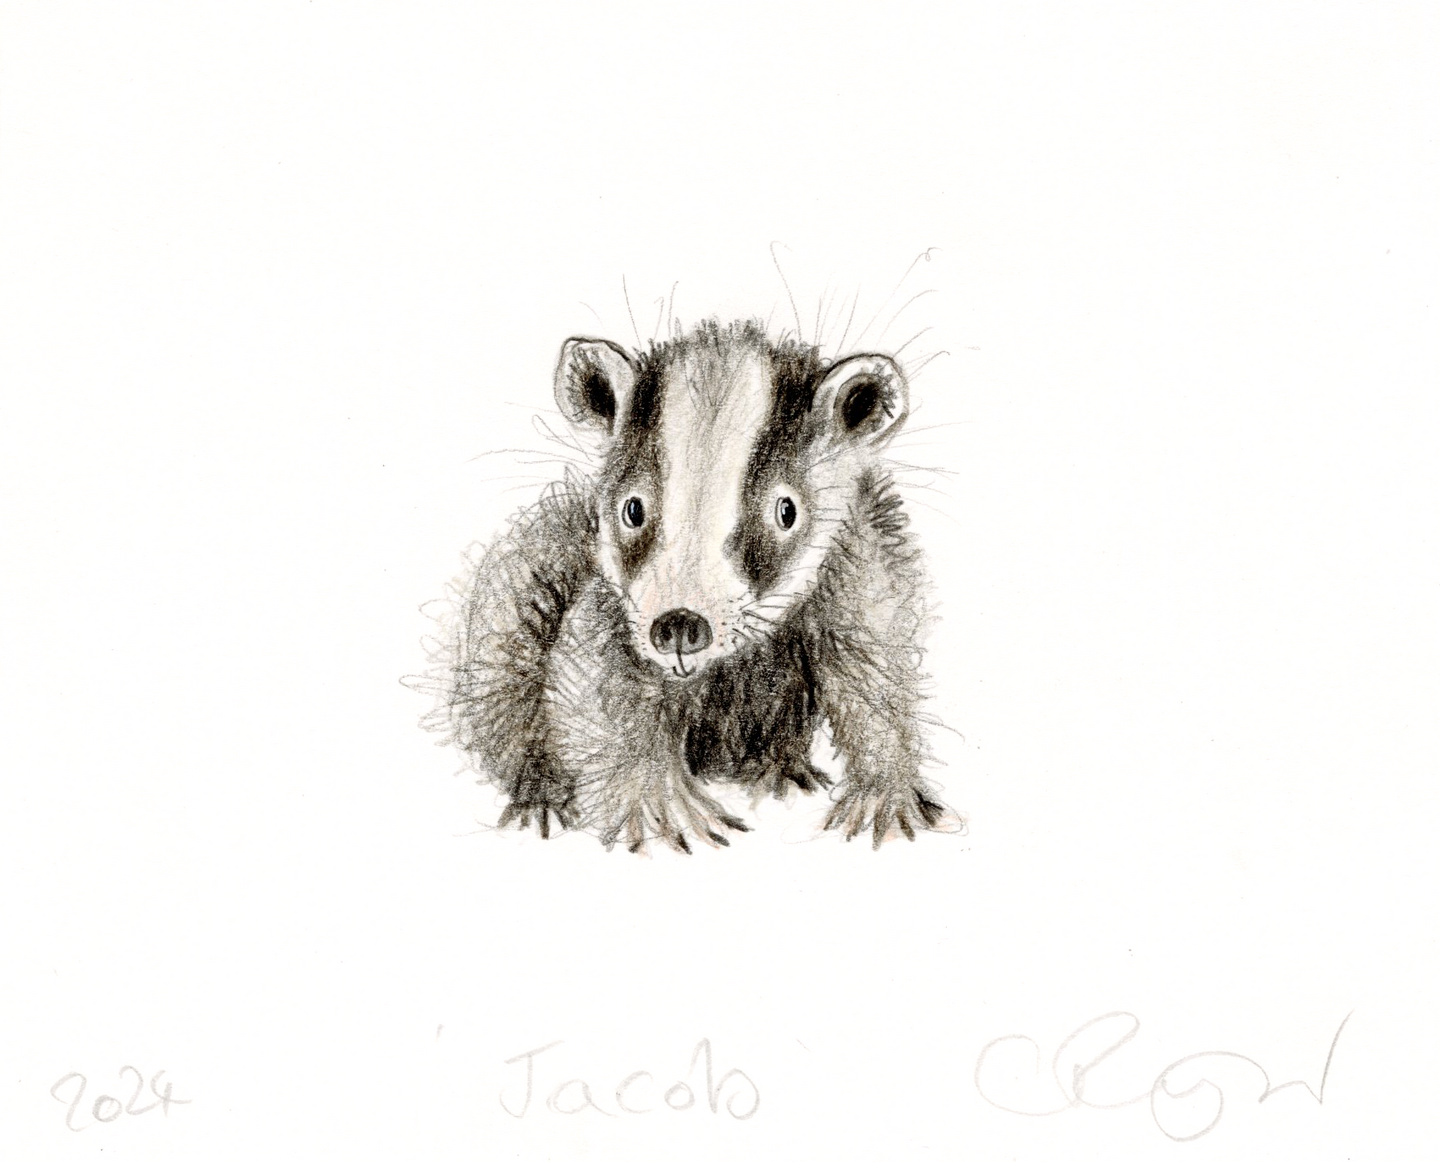 'Jacob' the baby badger